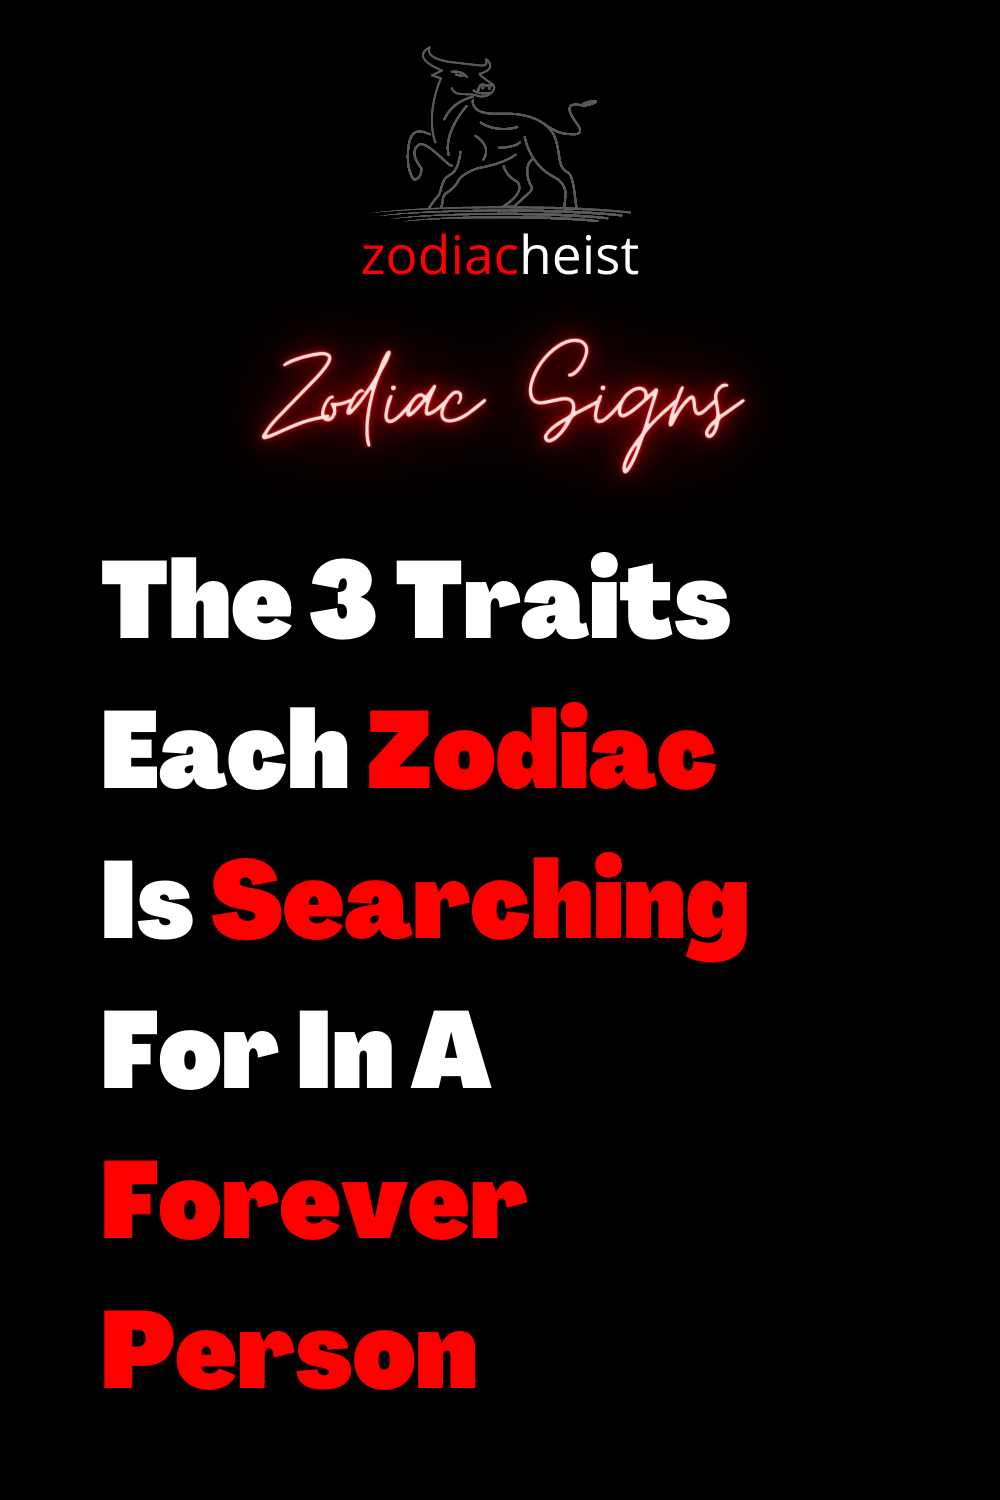 The 3 Traits Each Zodiac Is Searching For In A Forever Person